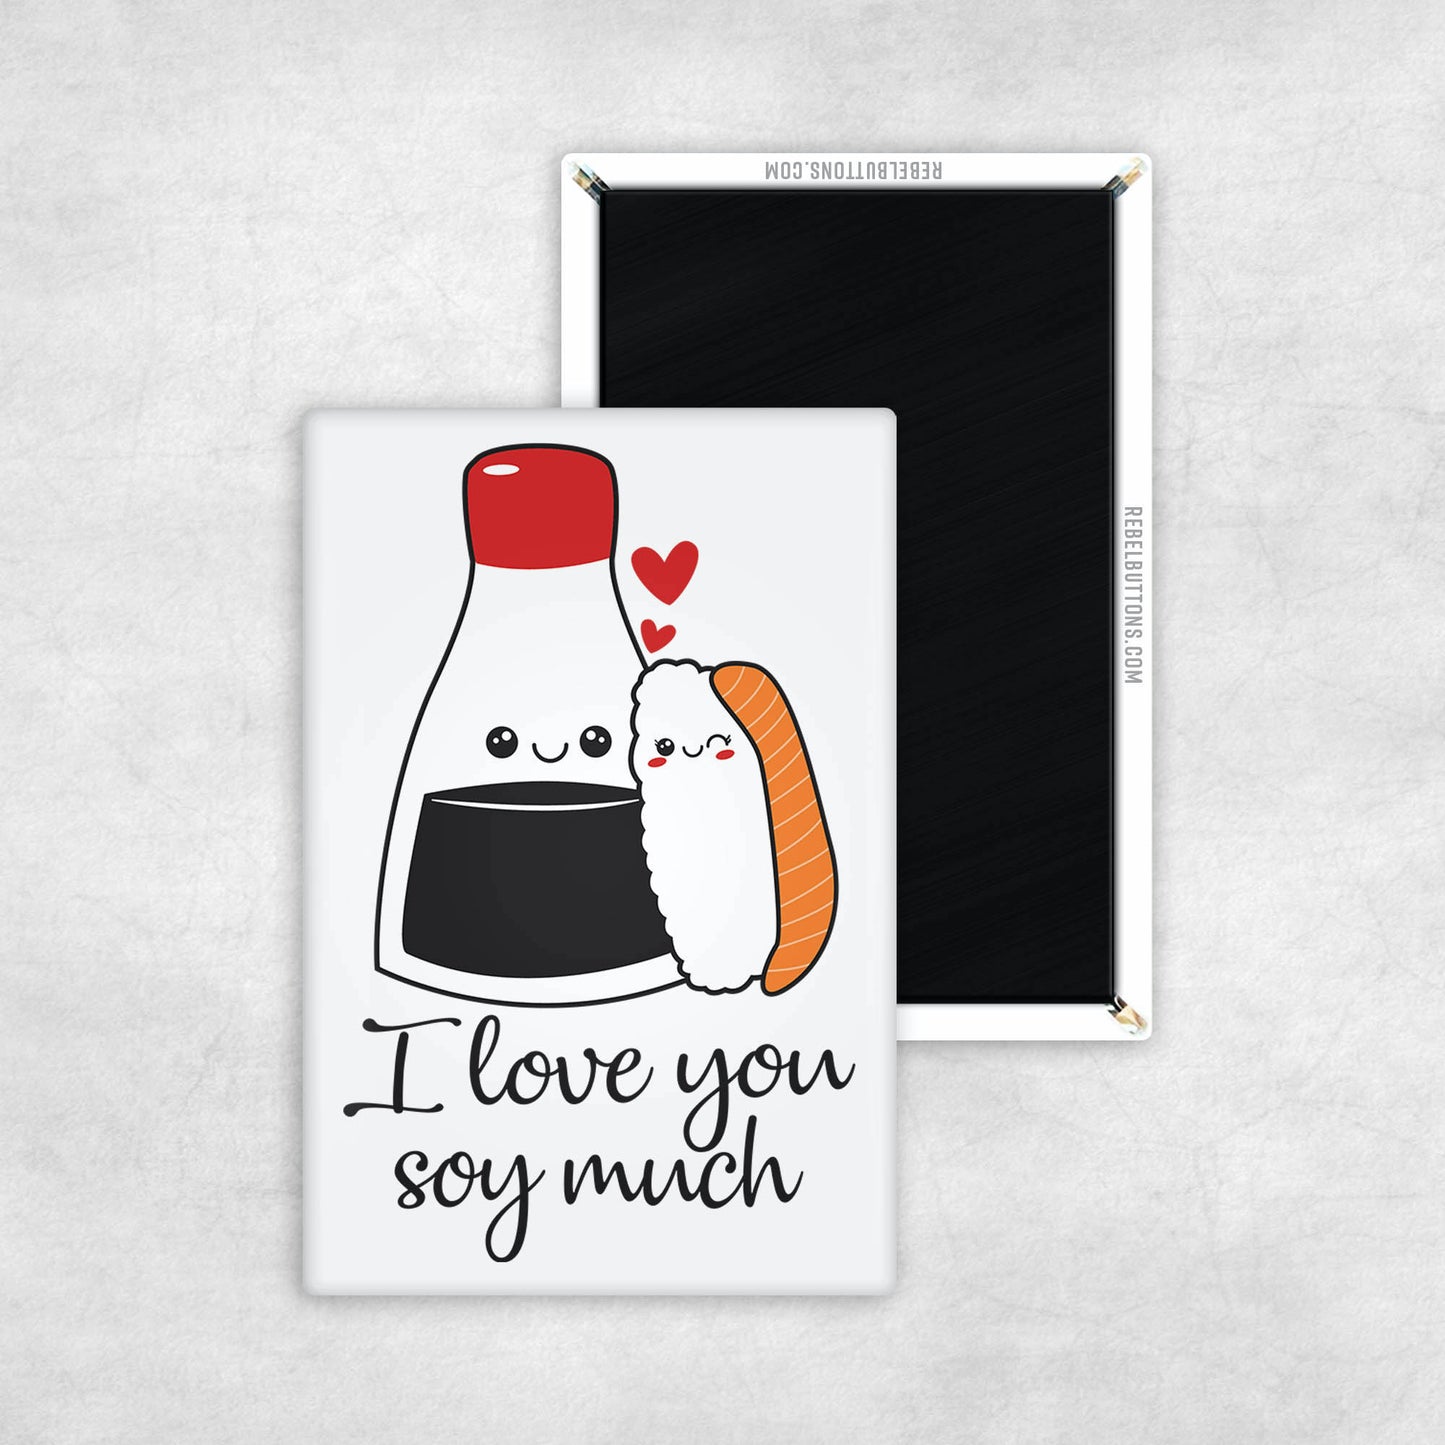 I Love You Soy Much Sushi Magnet